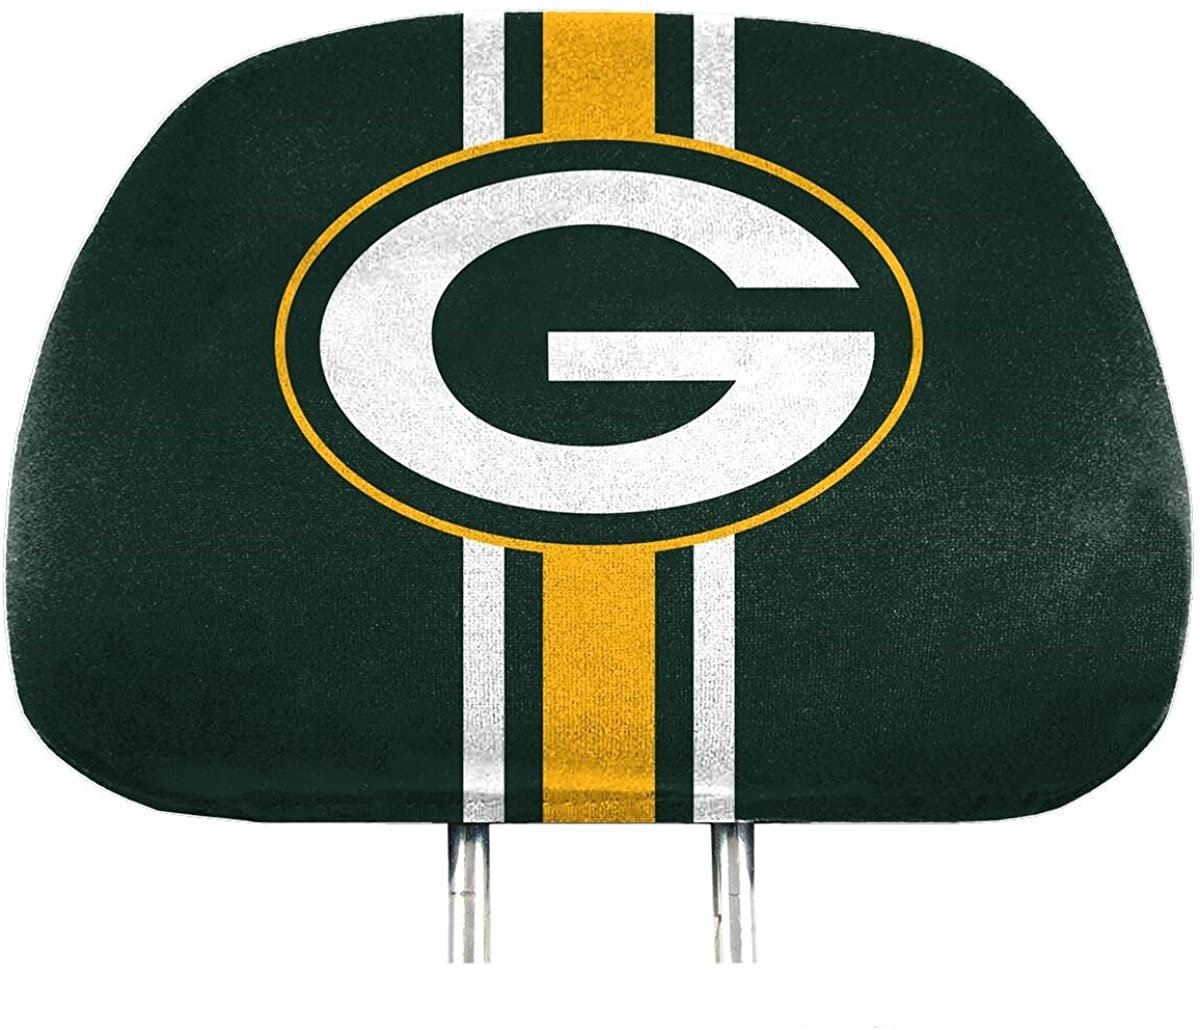 Green Bay Packers Premium Pair of Auto Head Rest Covers, Full Color Printed, Elastic, 10x14 Inch